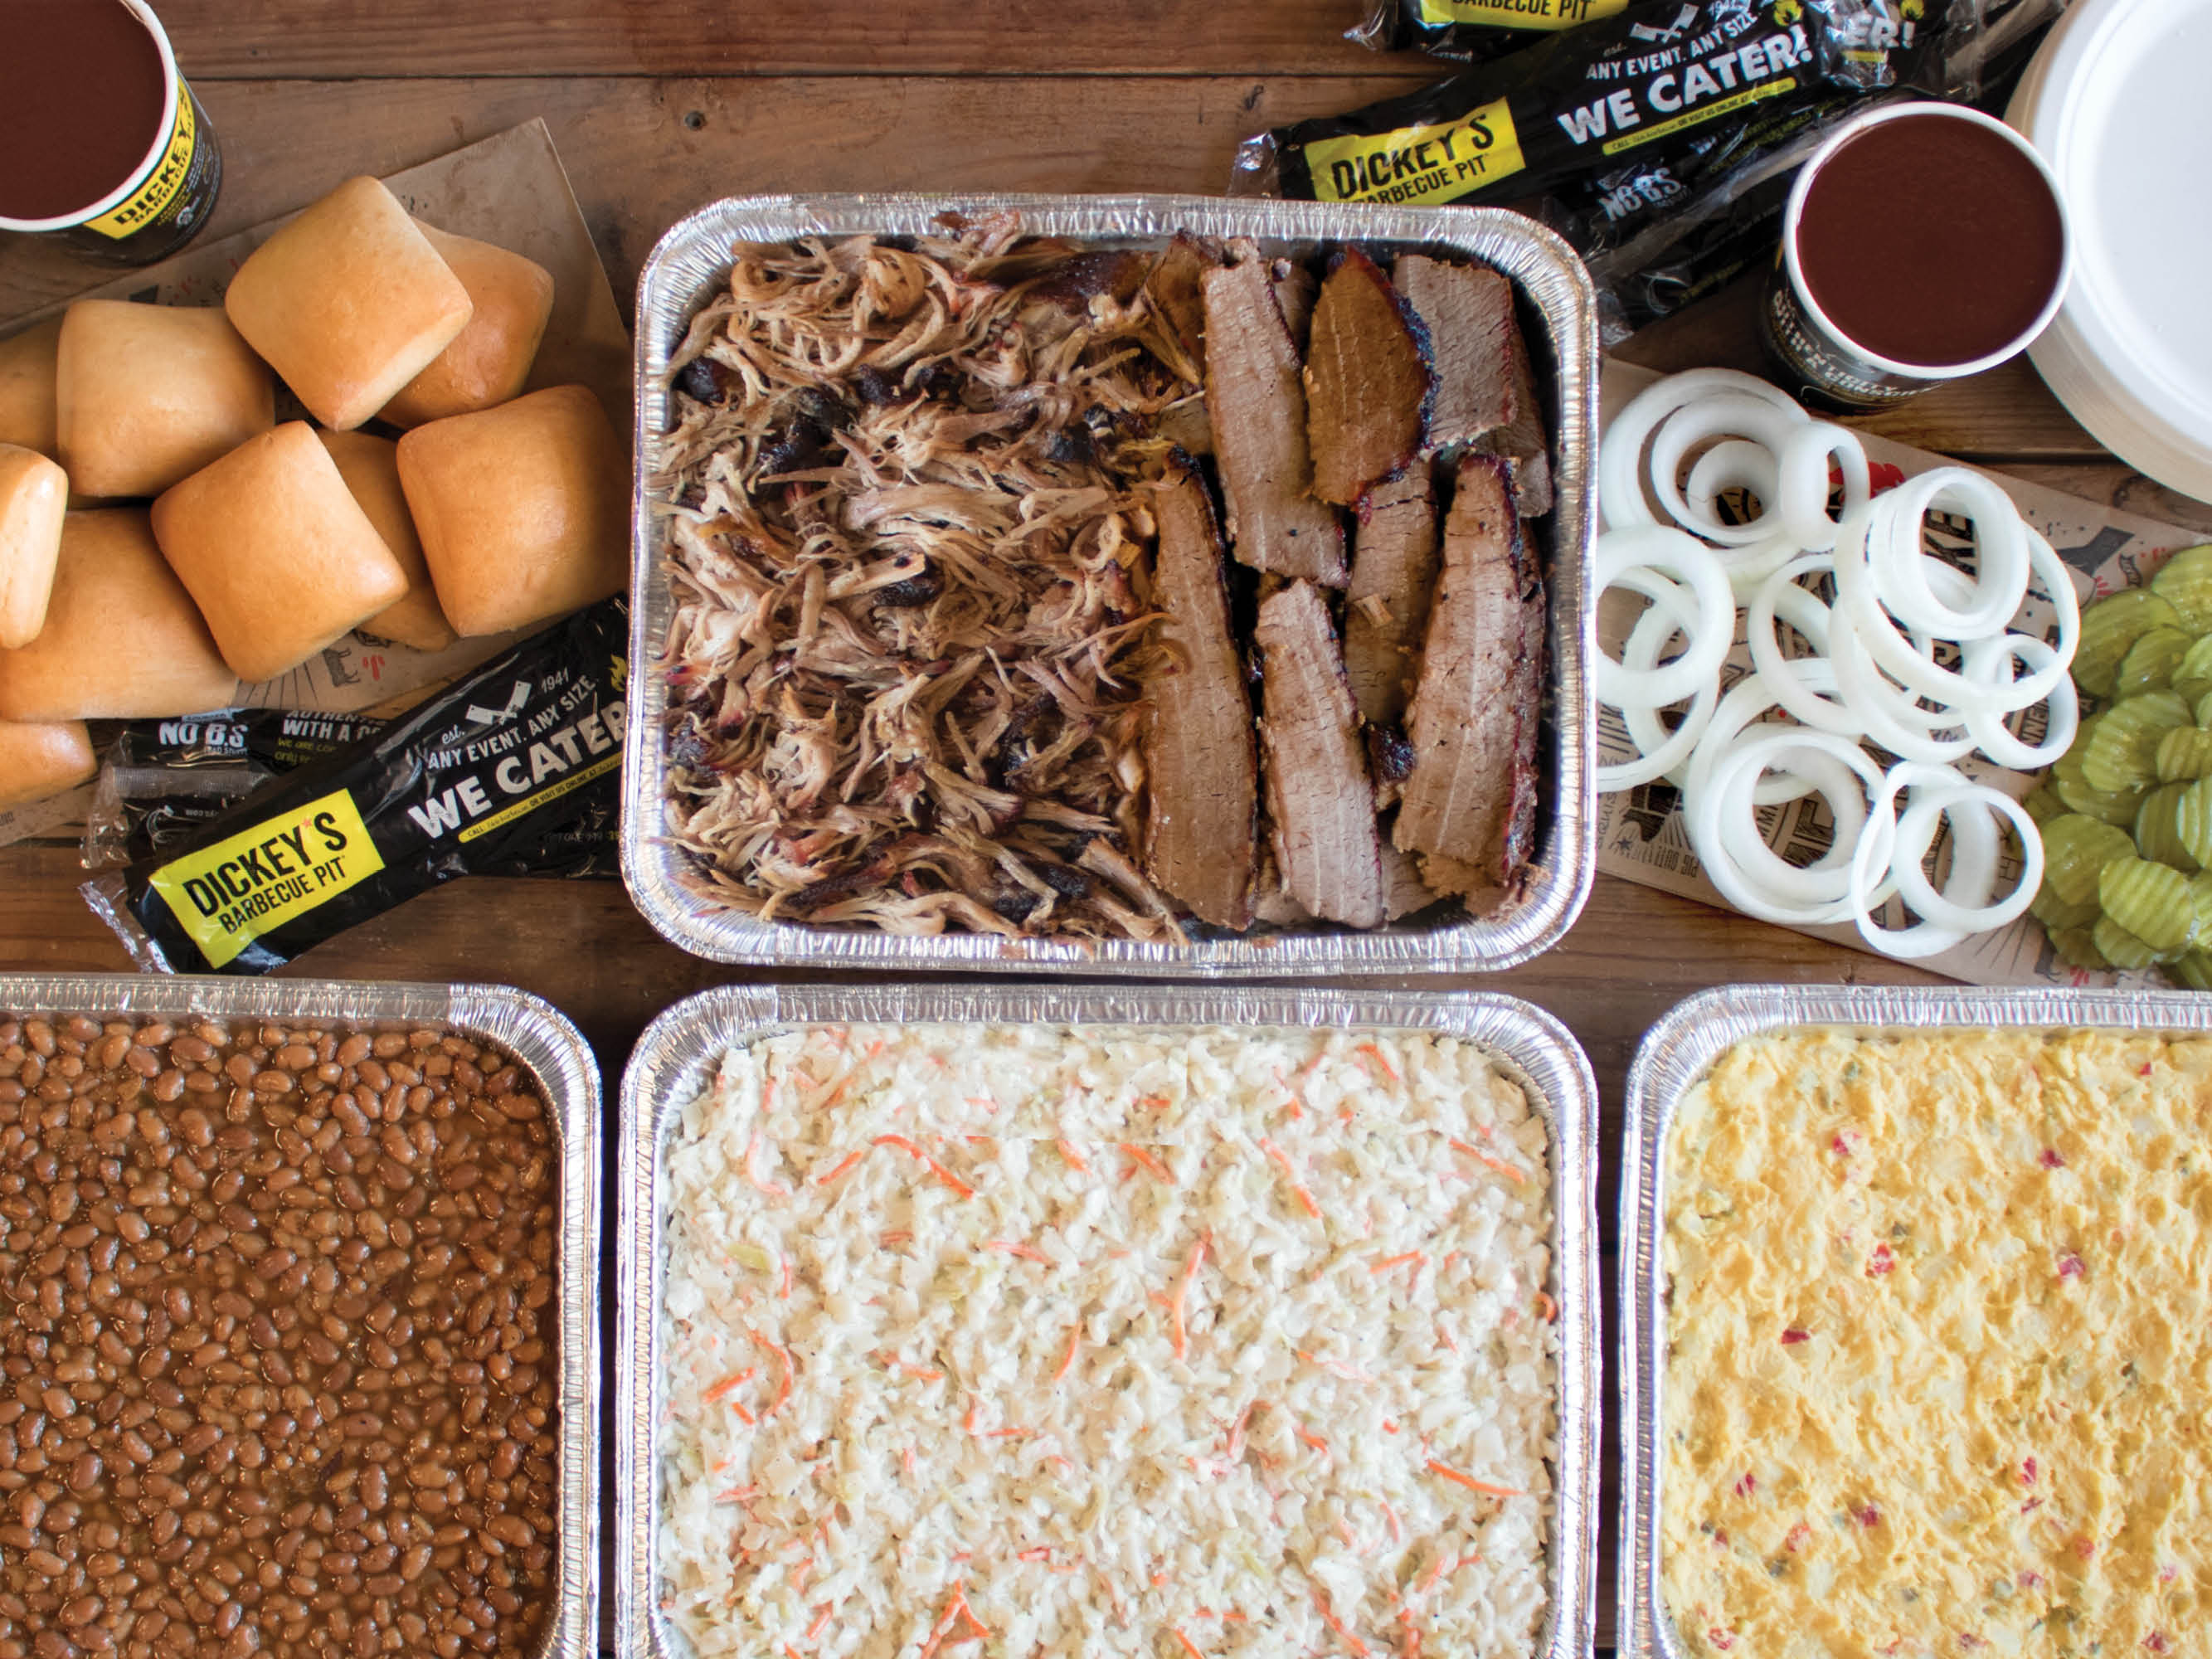 Dickey’s Tailgate Party Pack offers four pounds of slow-smoked meats along with potato salad, coleslaw, barbecue beans, and 12 buttery rolls.